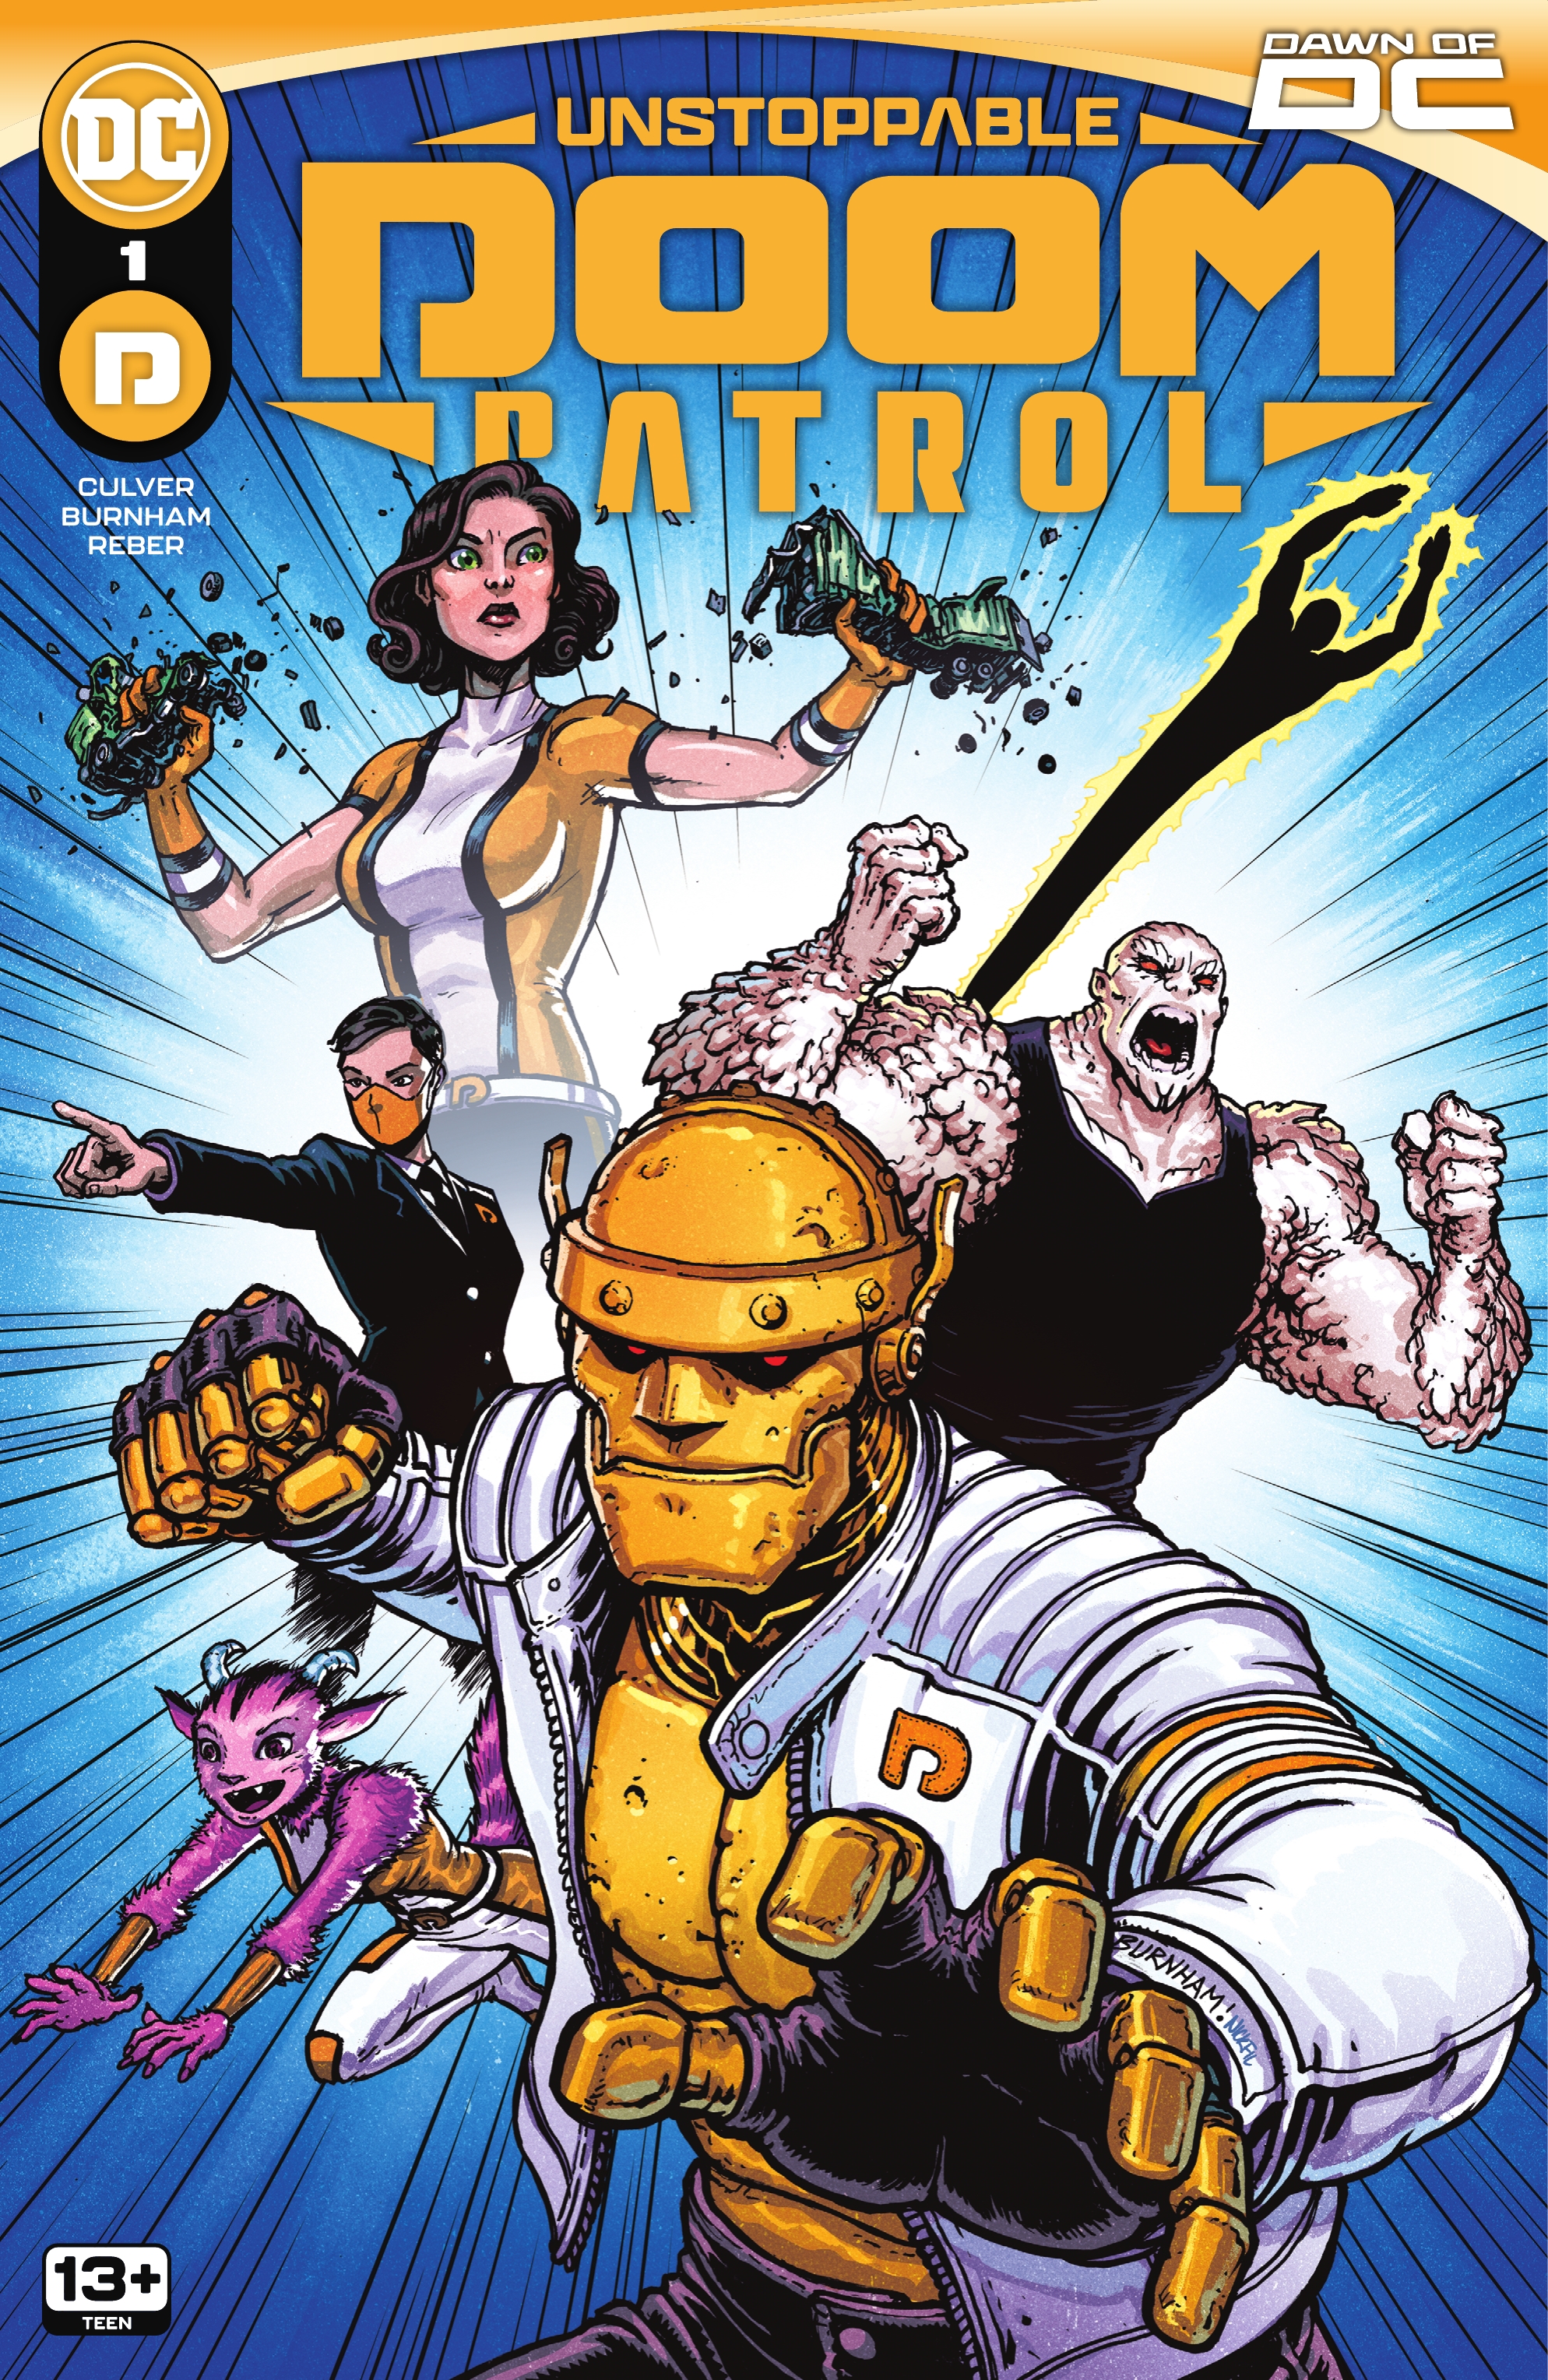 Read online Unstoppable Doom Patrol comic -  Issue #1 - 1